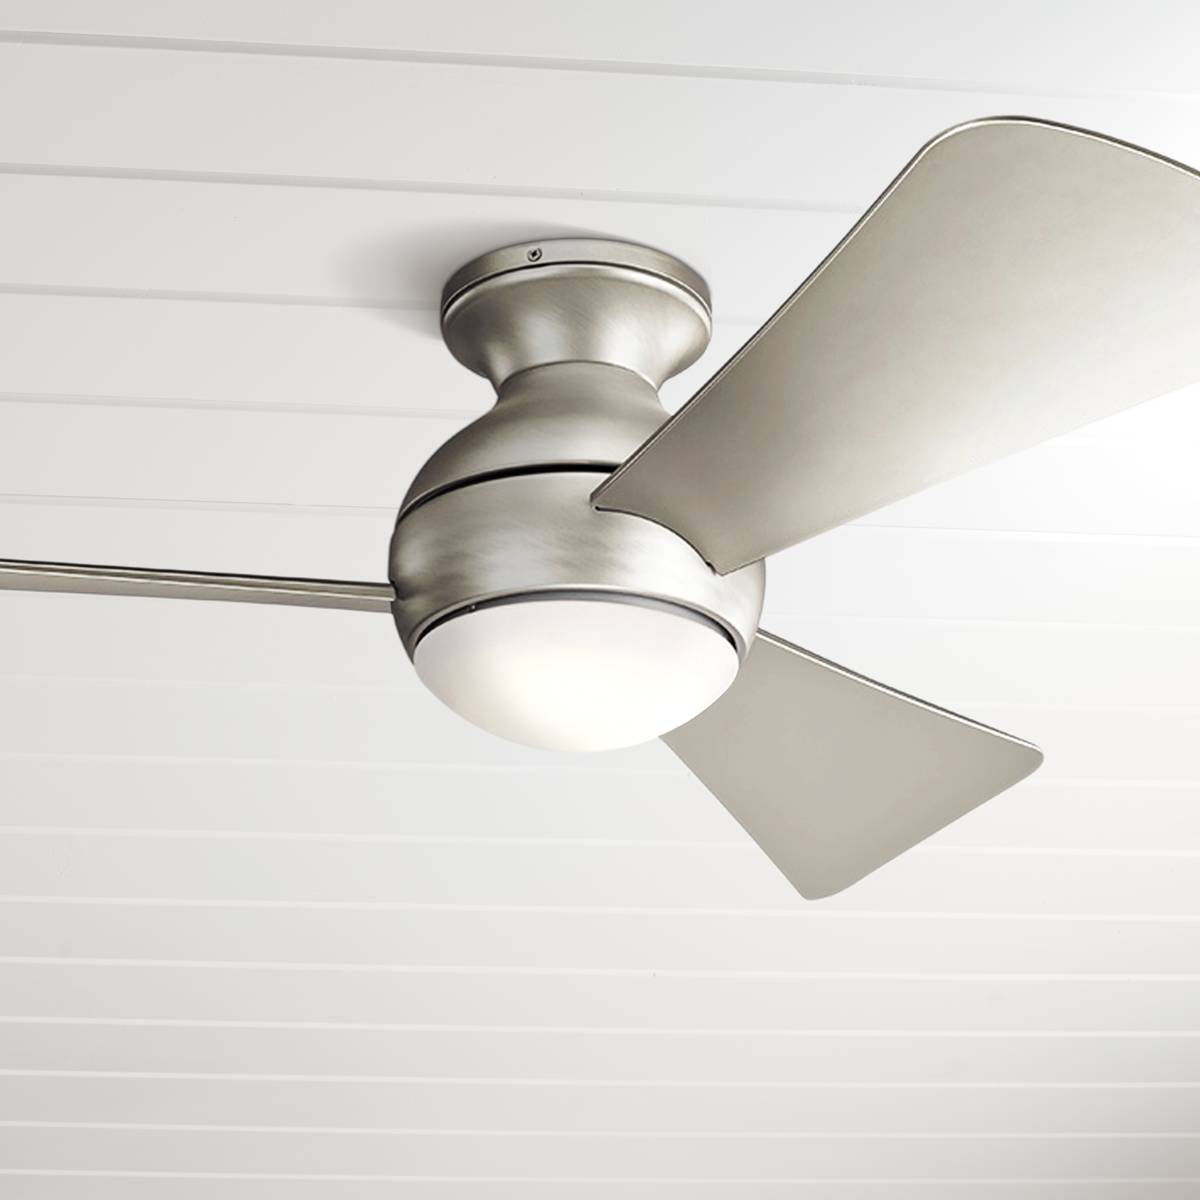 Small Ceiling Fans - 44 Inch Diameter and Less - Page 2 | Lamps Plus